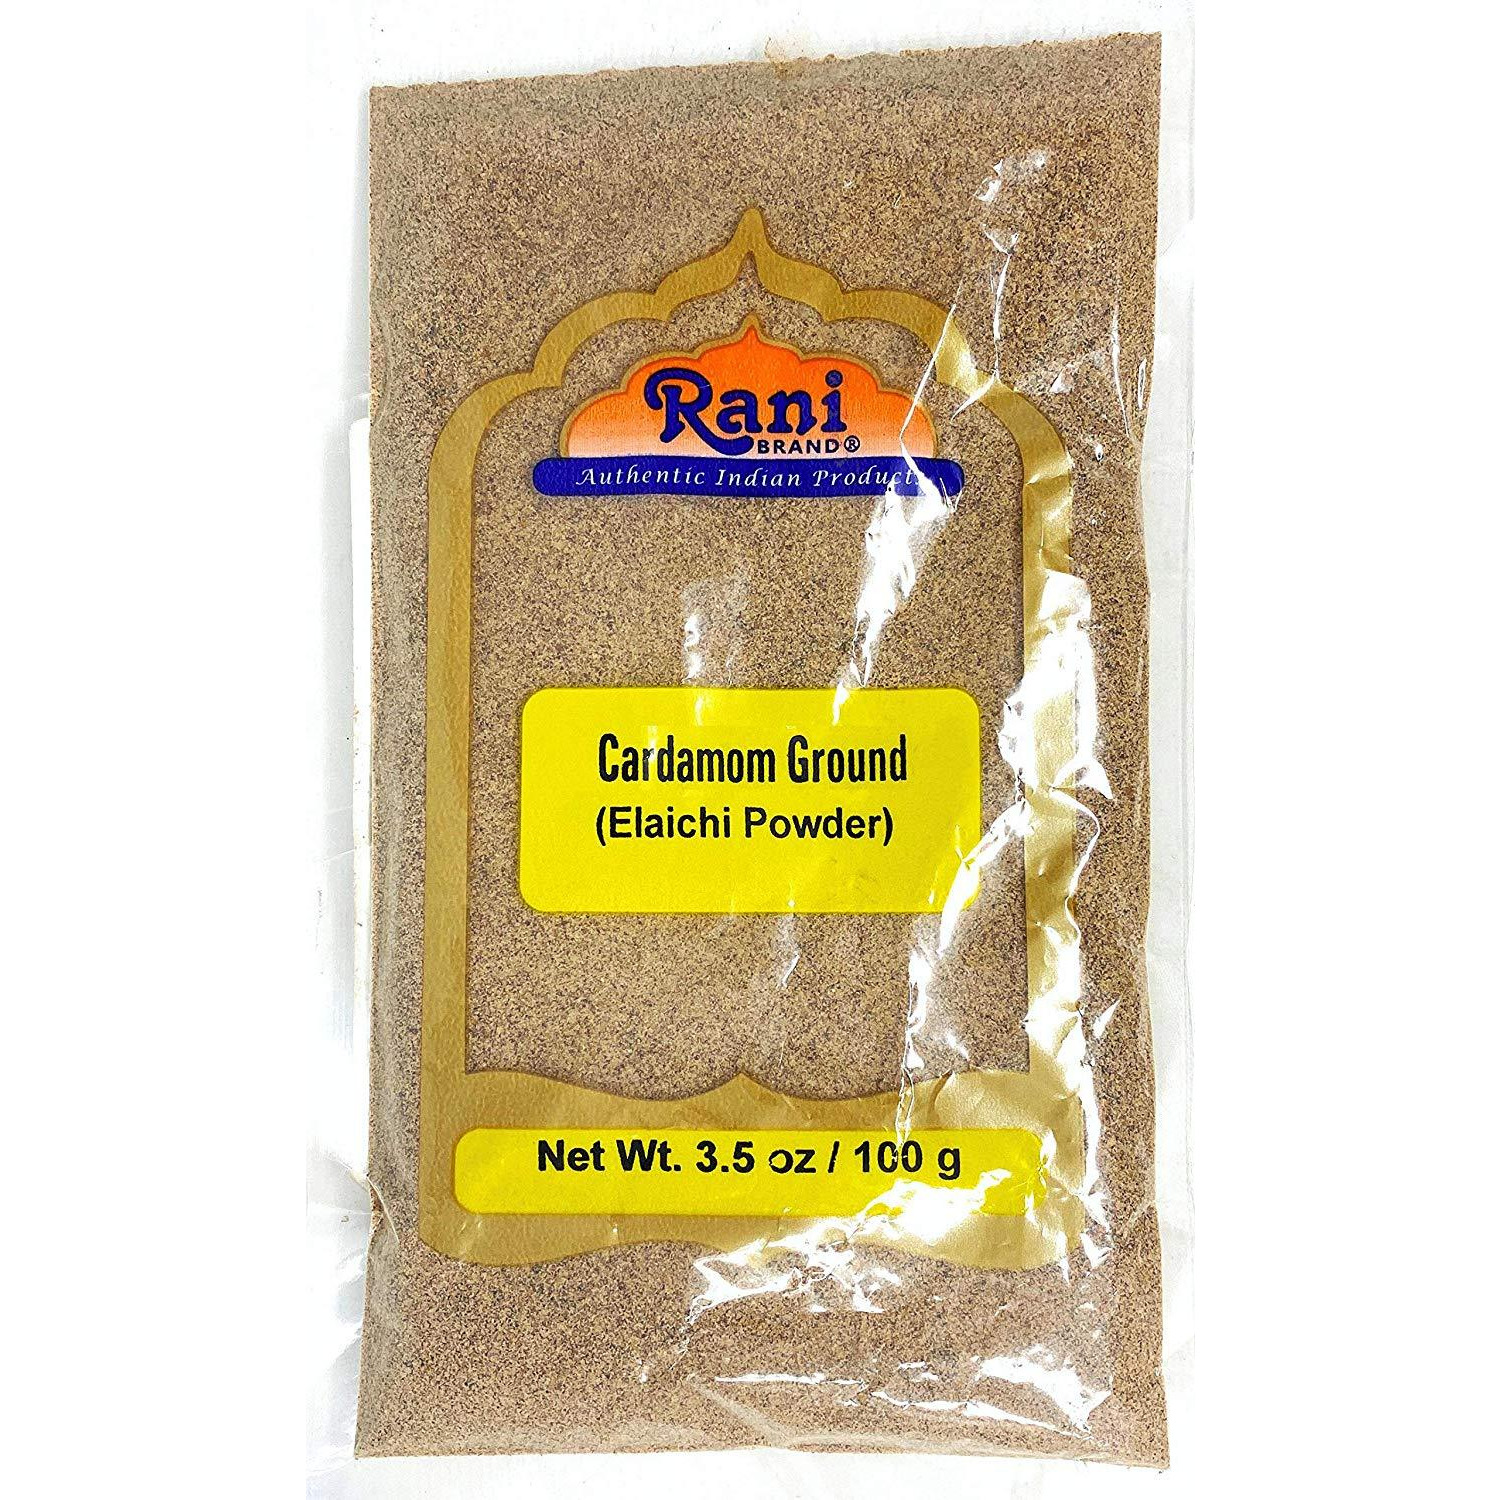 Rani Cardamom (Elachi) Ground, Powder Indian Spice 3.5oz (100g) ~ All Natural, No Color added, Gluten Free Ingredients | Vegan | NON-GMO | No Salt or fillers